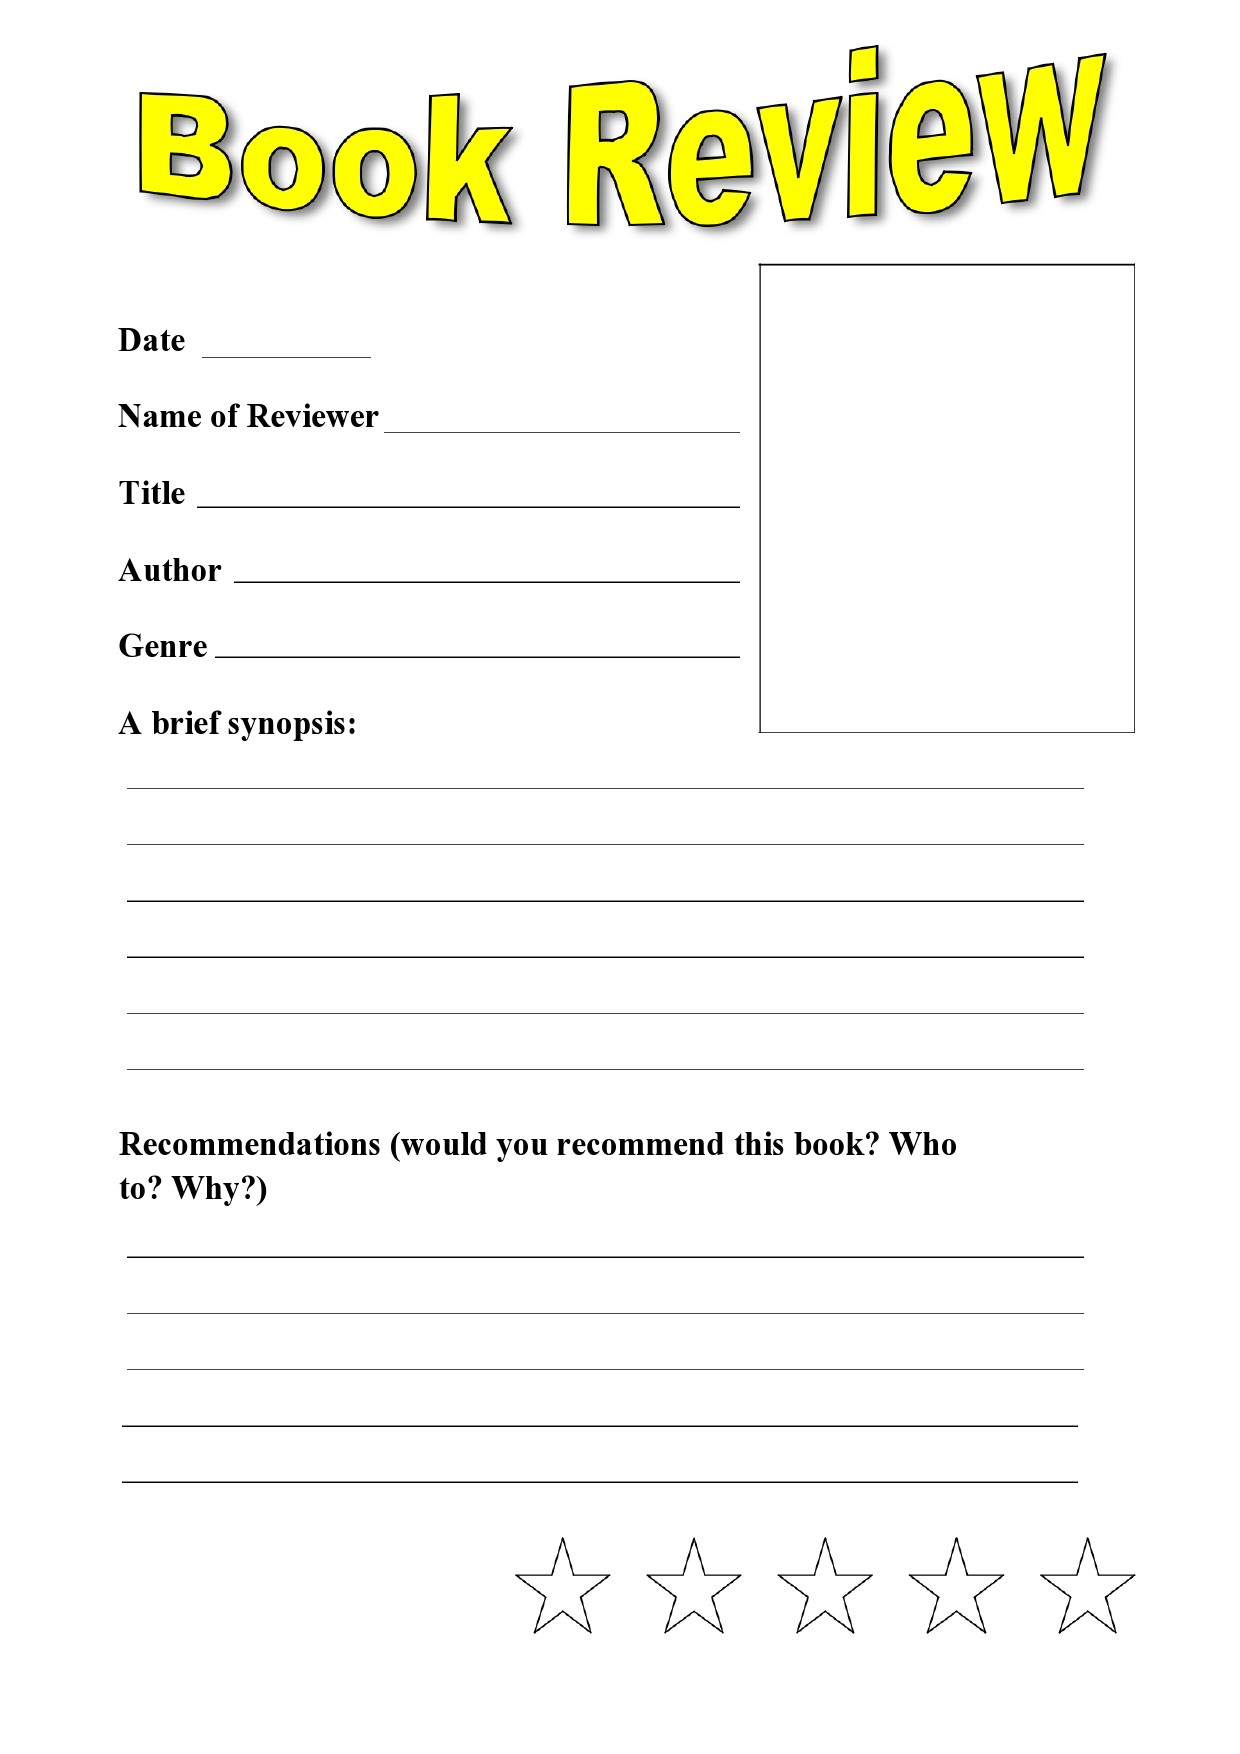 book review form 5